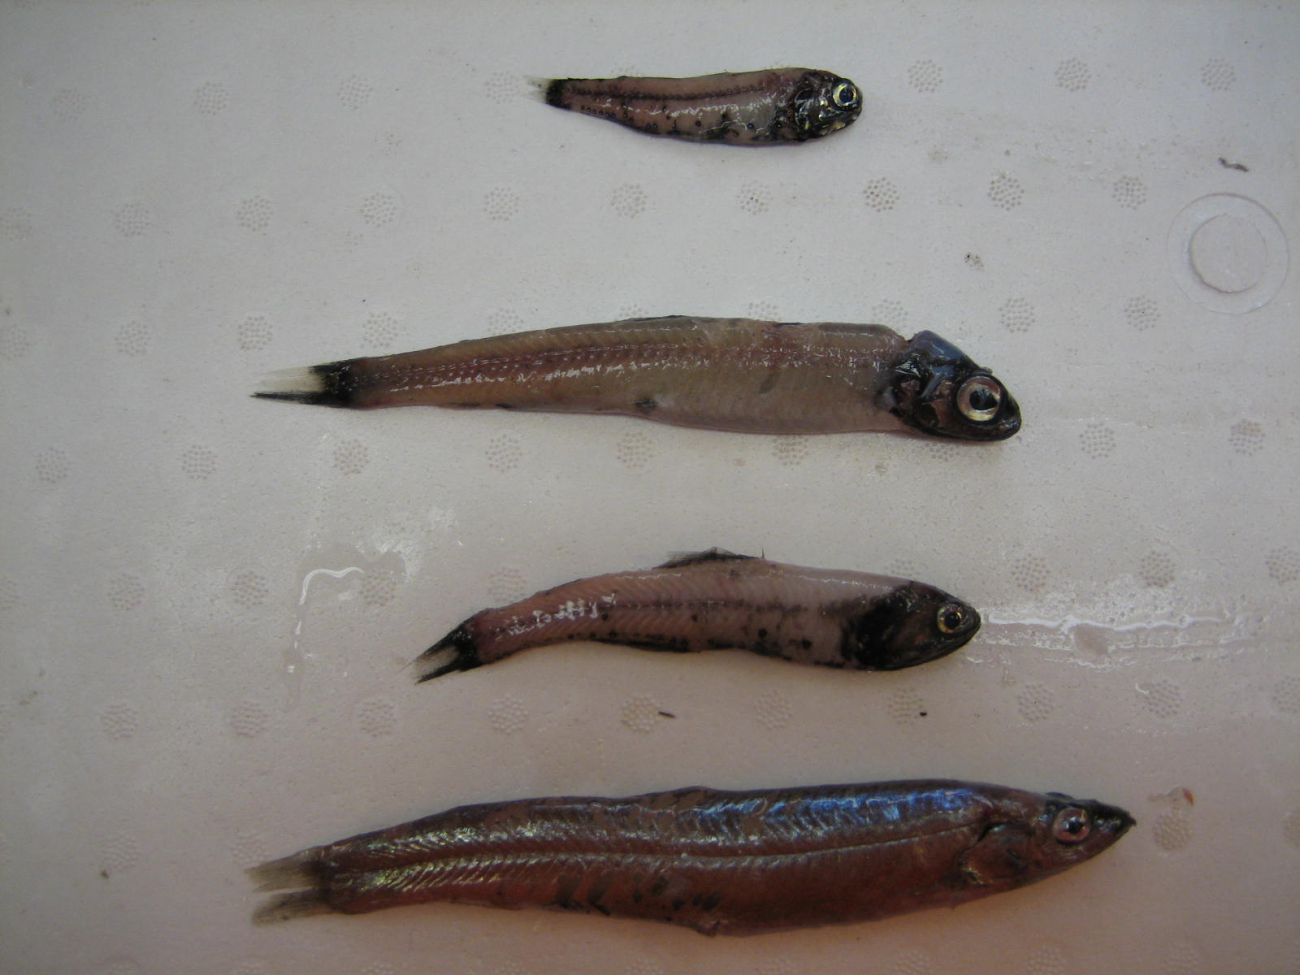 Lanternfish and other small fish caught in midwater trawl